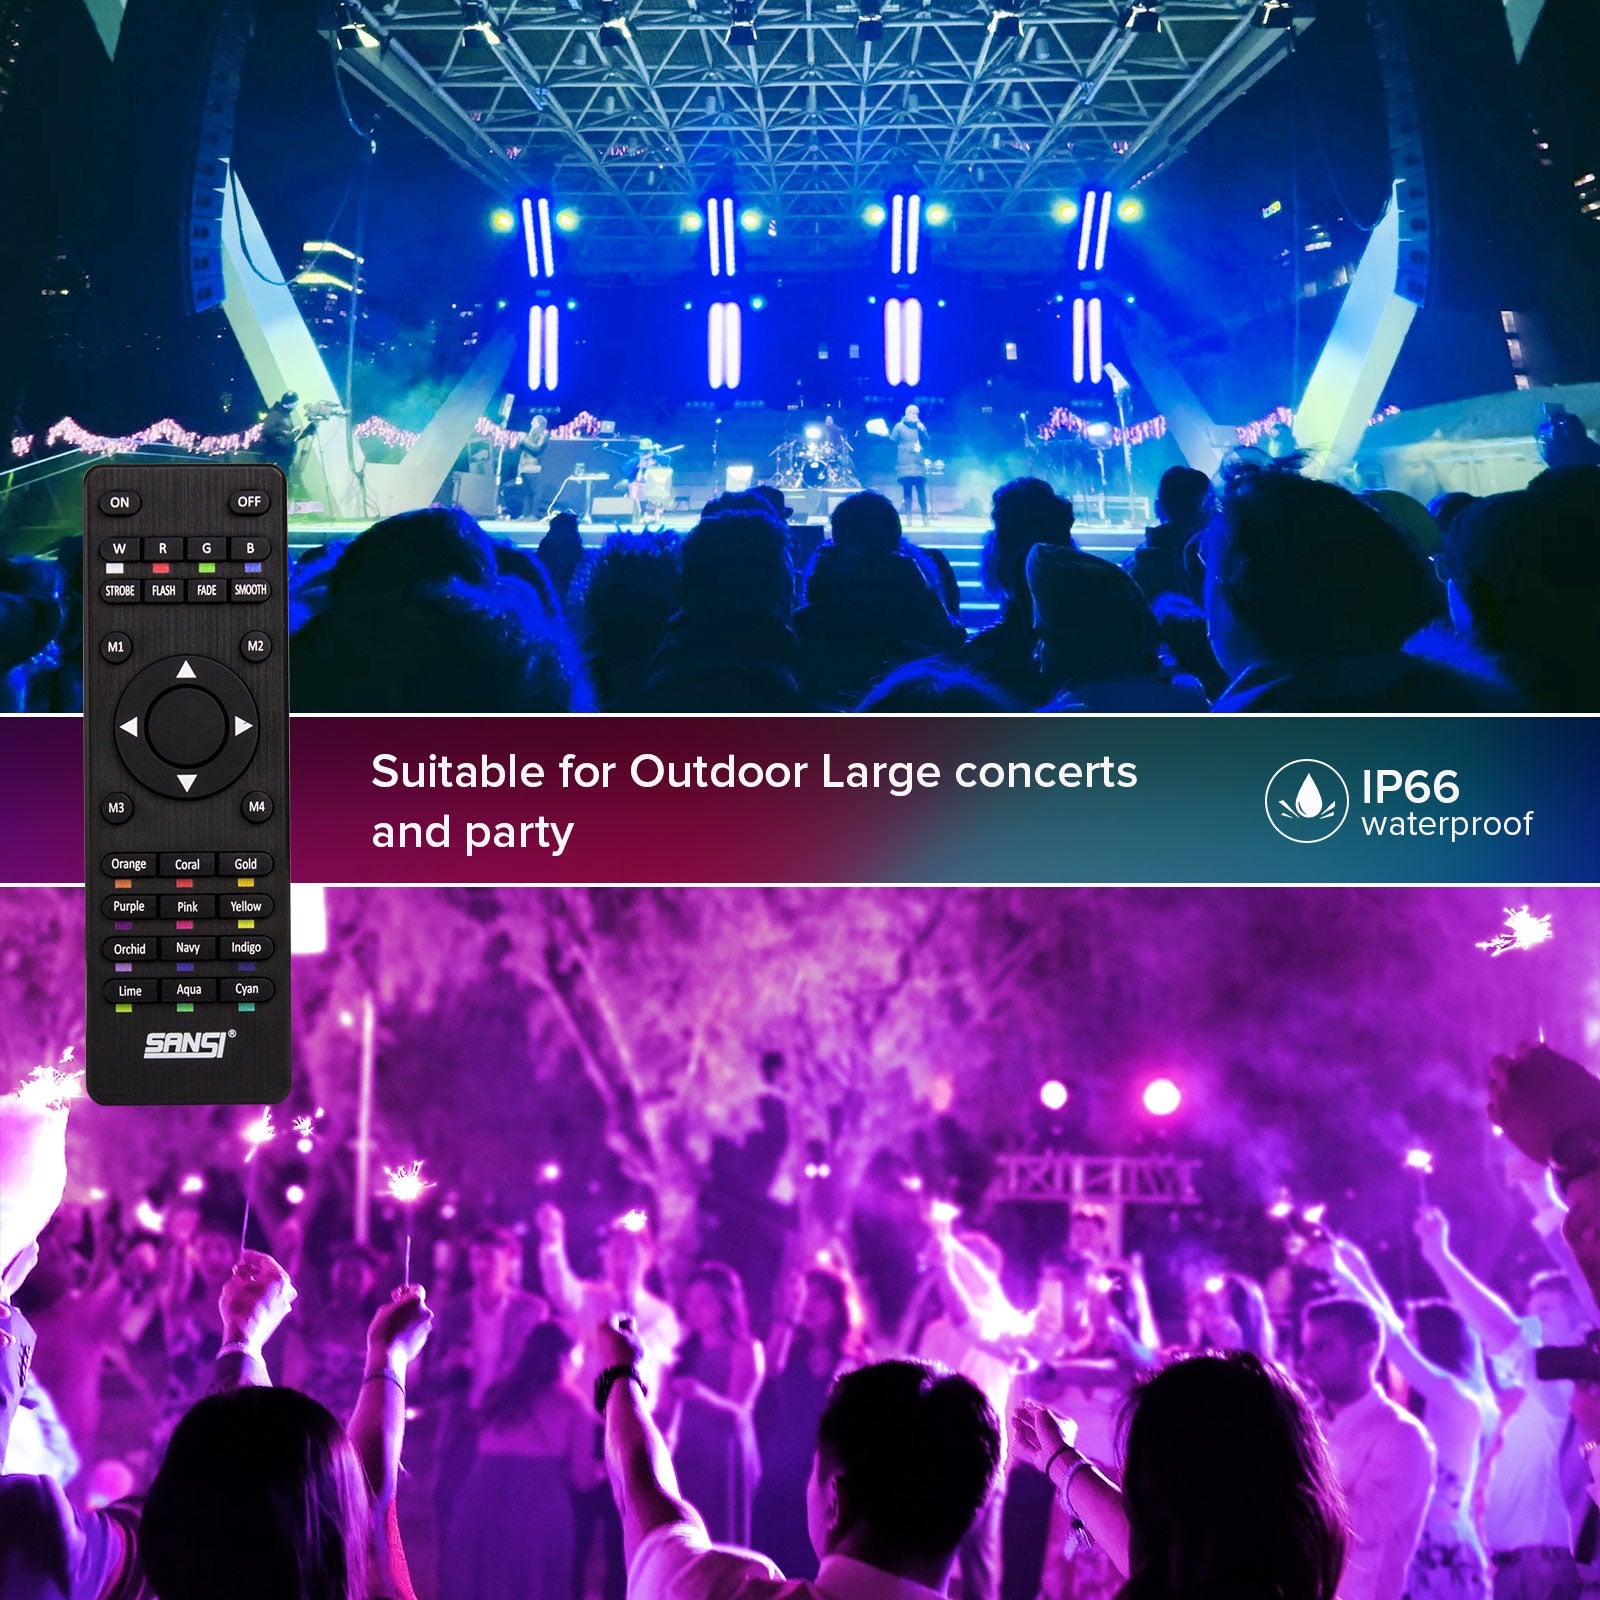 Upgraded 50W RGB LED Flood Light (US ONLY) is IP66 waterproof，which is suitable for outdoor large concerts and party..